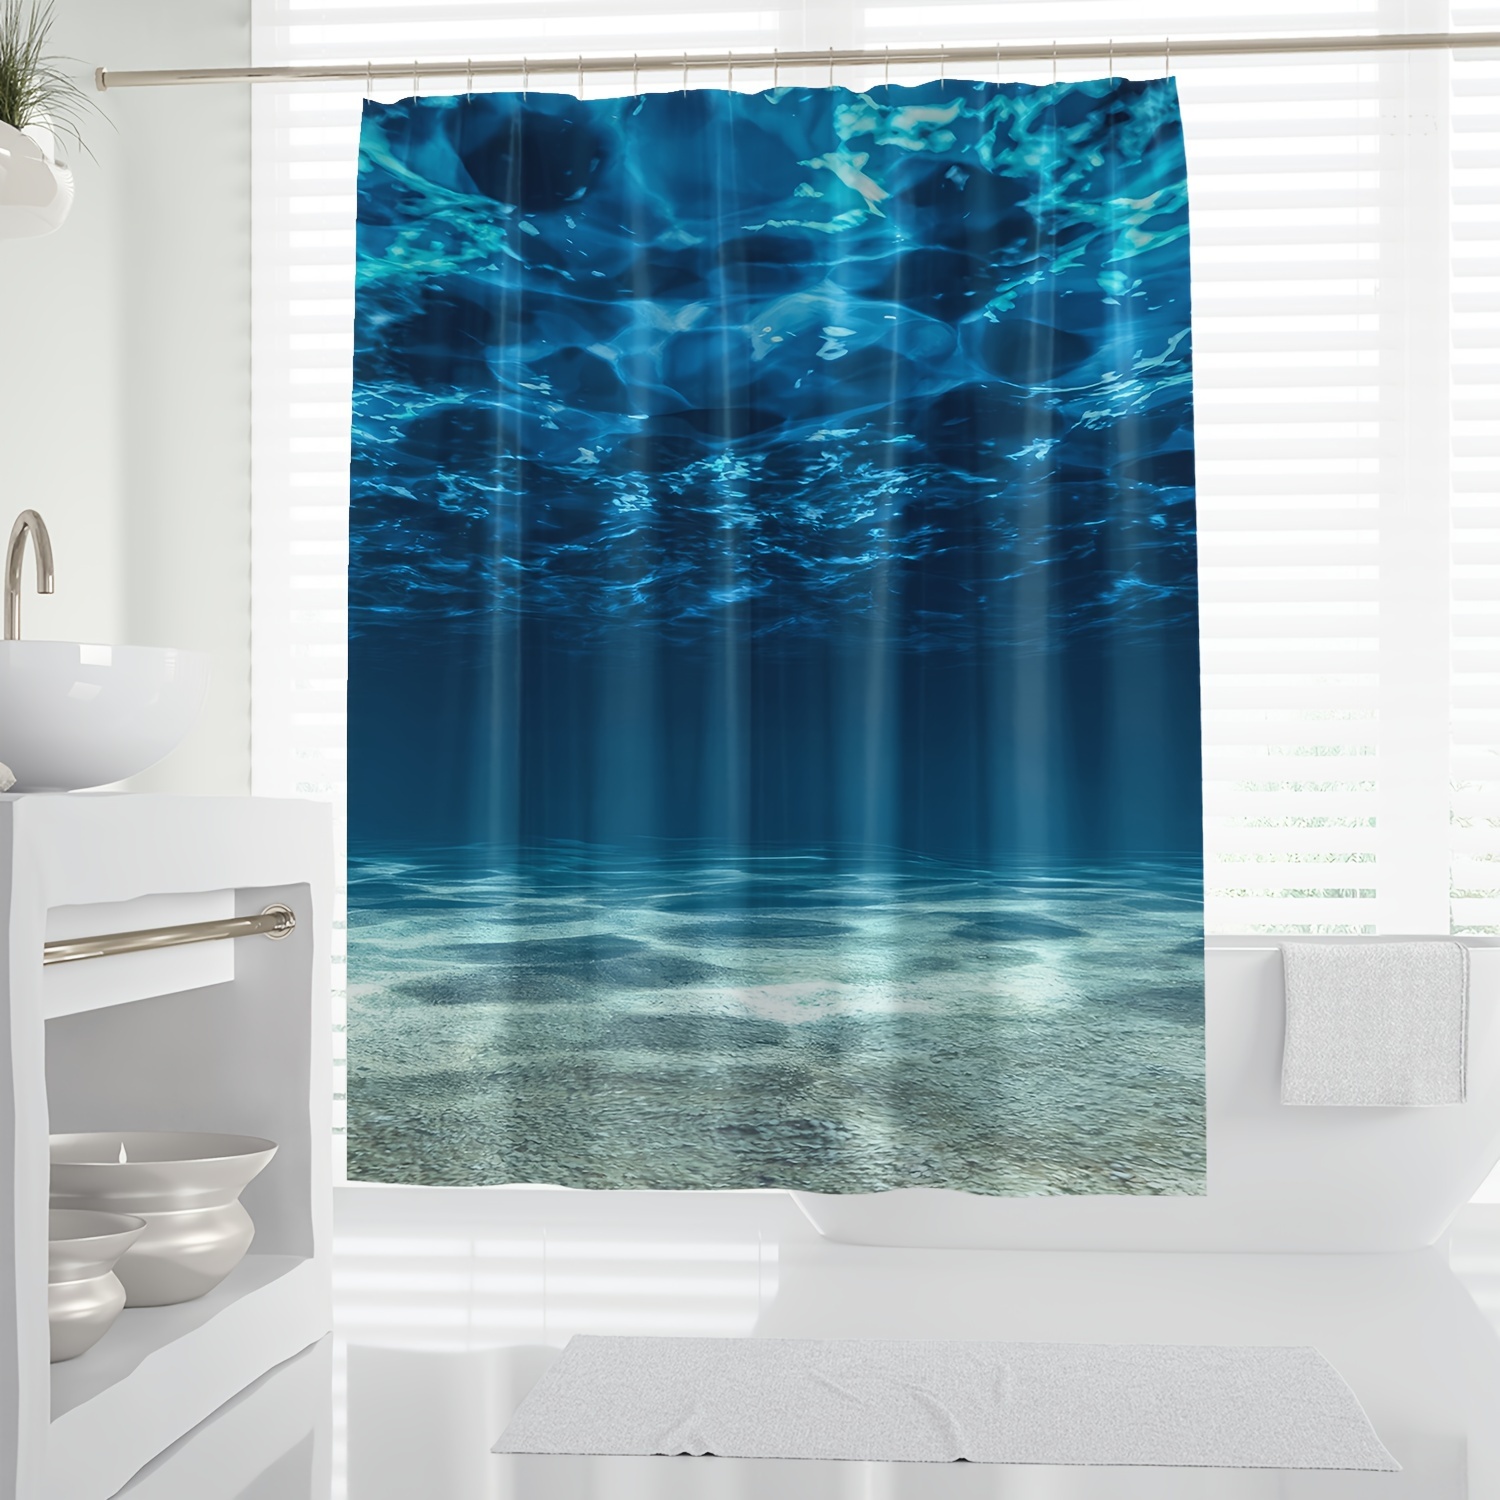 

1pc Digital Print Ocean Blue Scenery Shower Curtain, Water-resistant Polyester With Knit Weave, Machine Washable, Includes Hooks - All-season Arts Themed Bathroom Decor